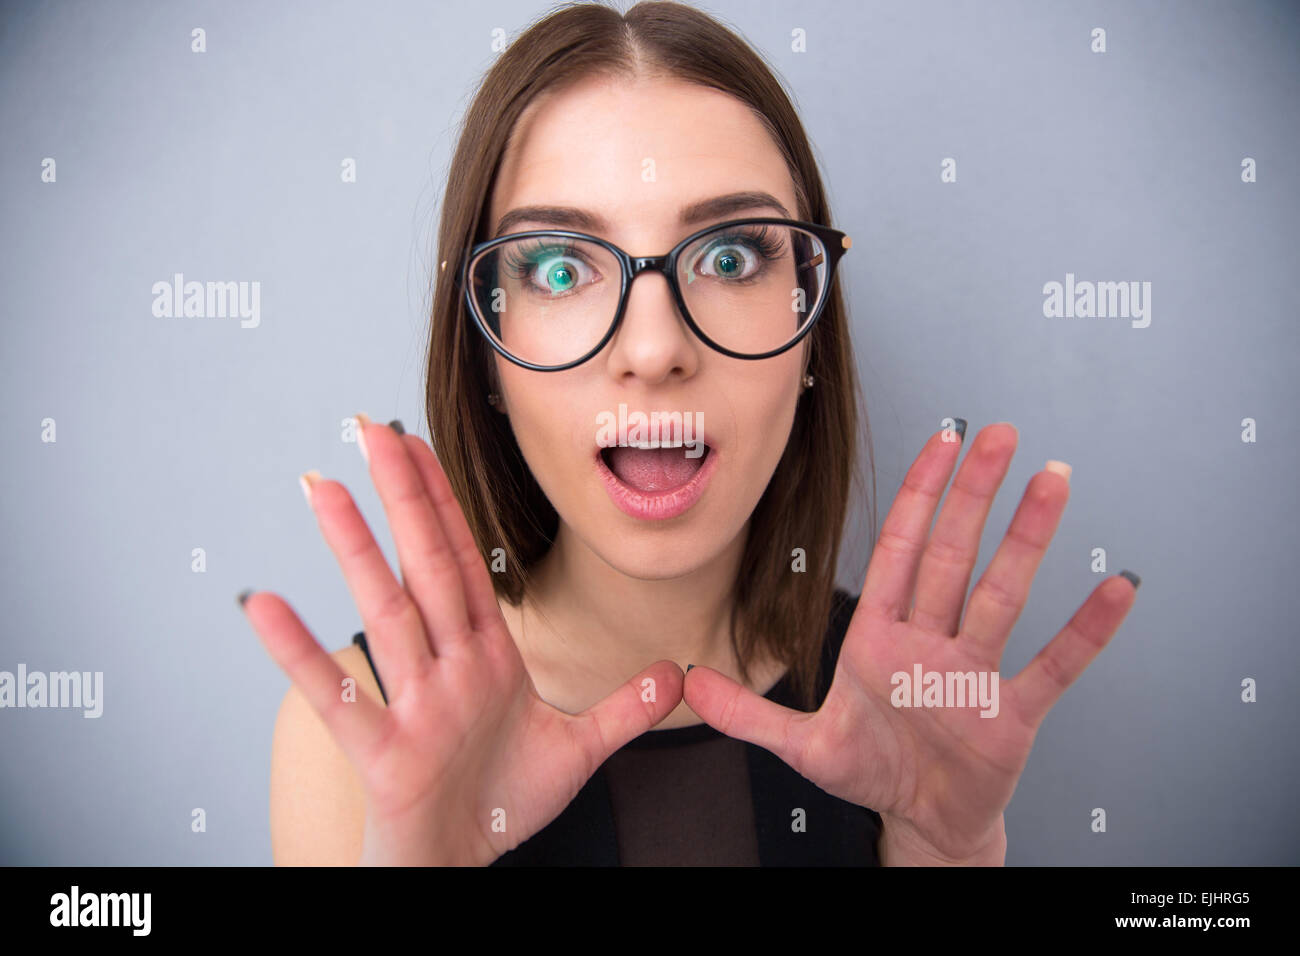 Closeup portrait of a surprised woman looking at the camera. Standing over gray background Stock Photo